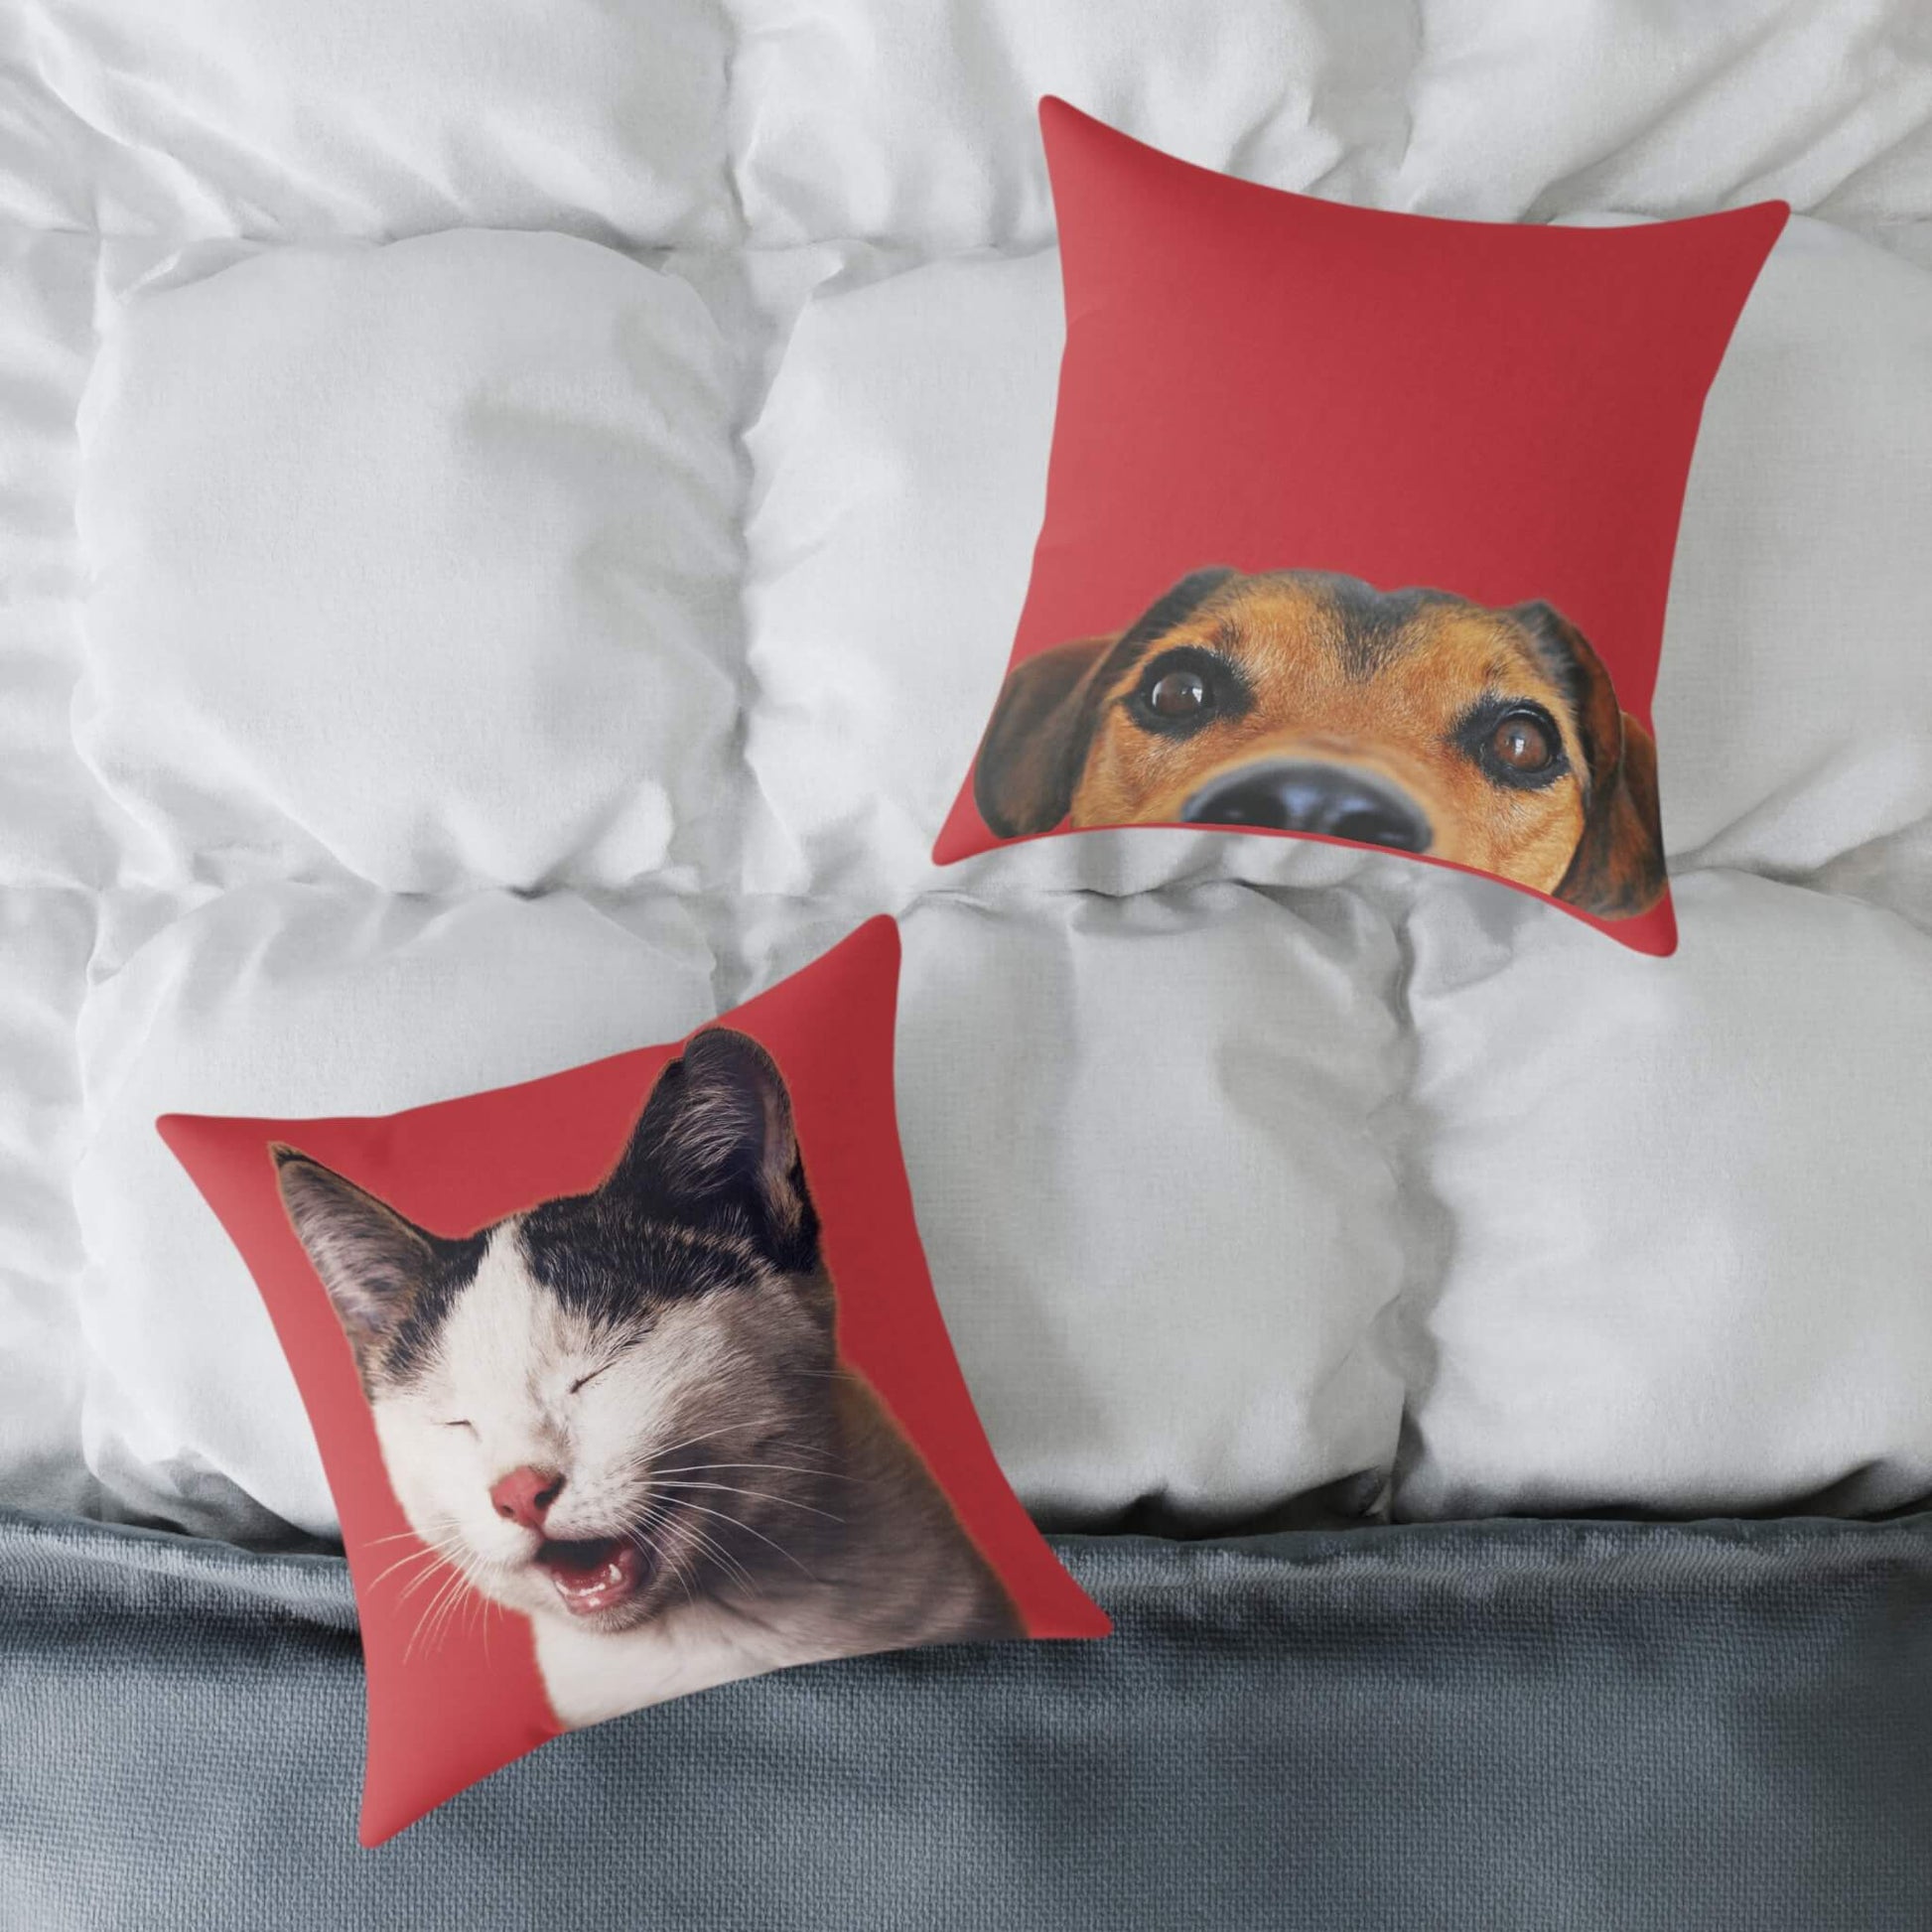 custom pet photo pillows and cushions, personalized pet-themed photo frames and albums, handcrafted pet accessories, pet-friendly home decorations, pet-themed jewelry and accessories, custom pet themed products, personalized pet gifts, dog lover gifts, cat lover gifts, custom pet portraits, pet lover home decor